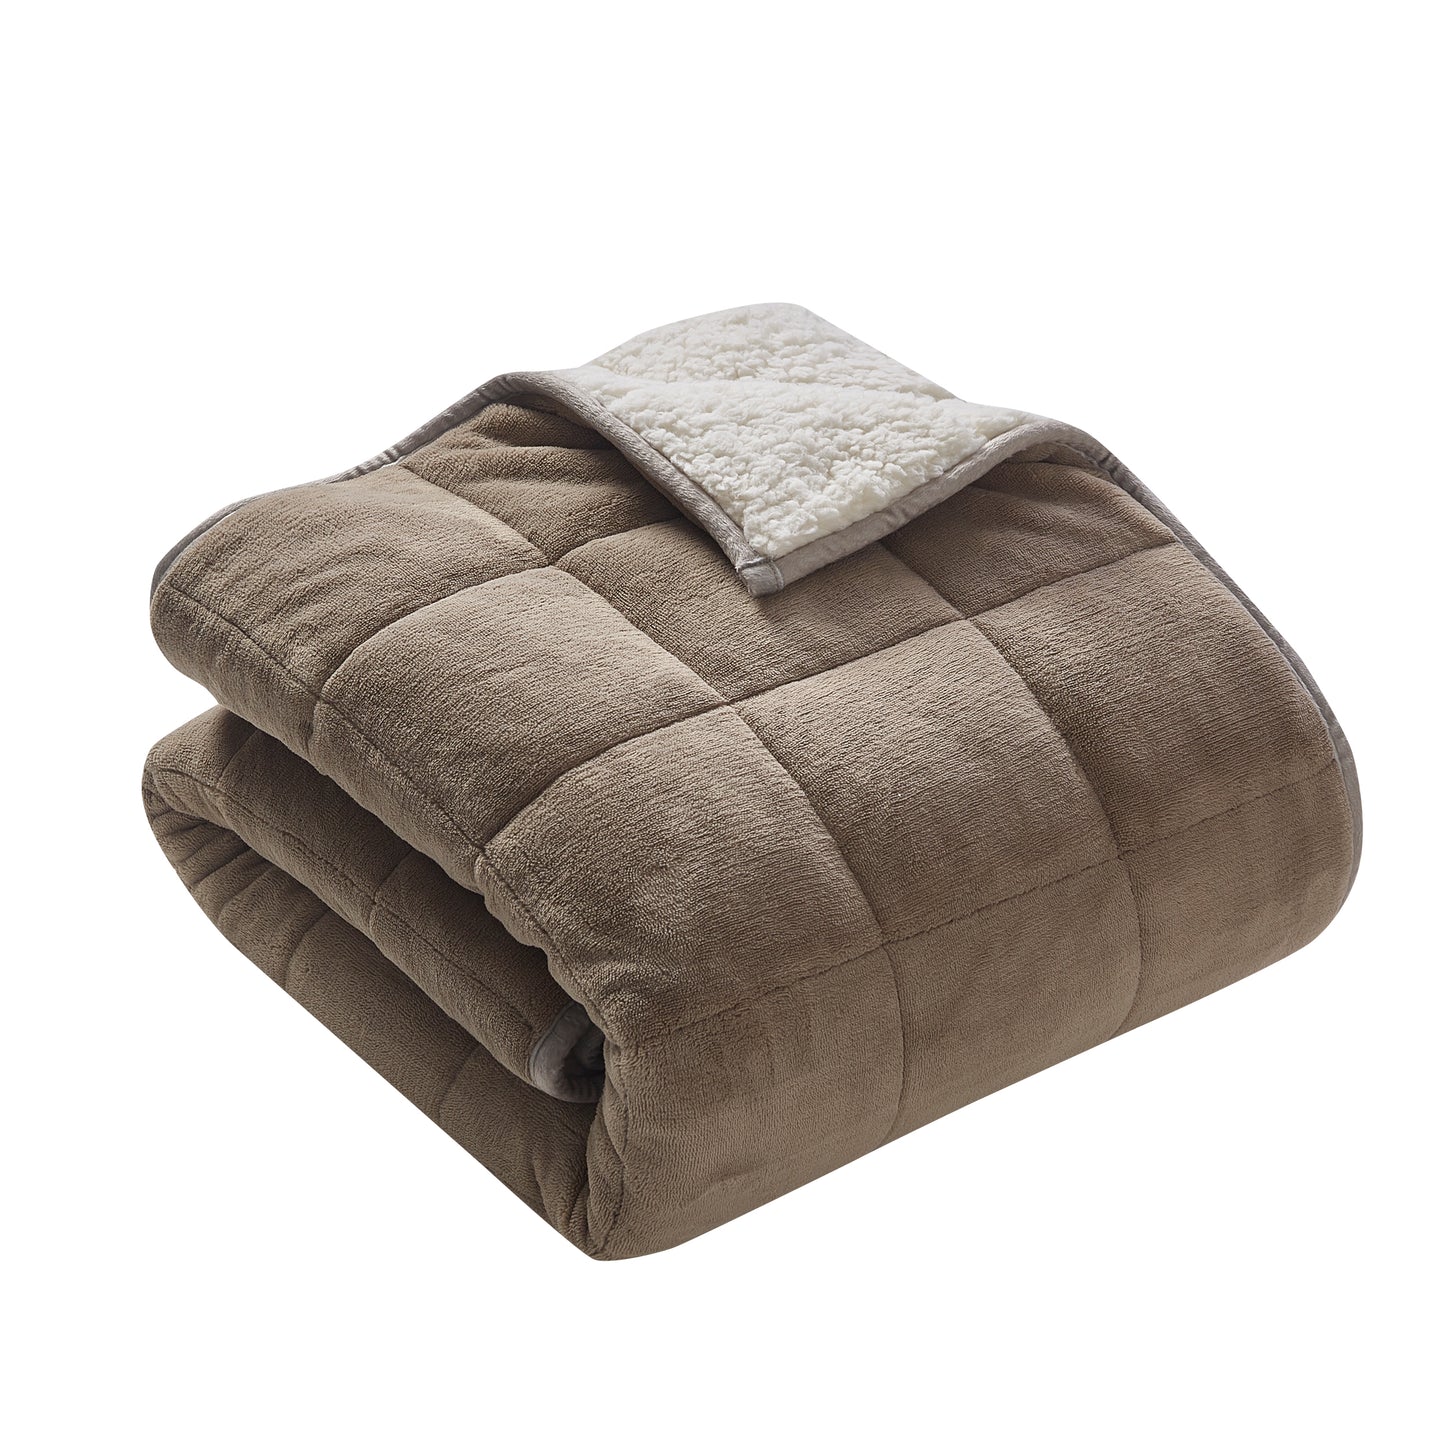 Weighted Blanket with Premium Glass Beads 10lbs - Taupe